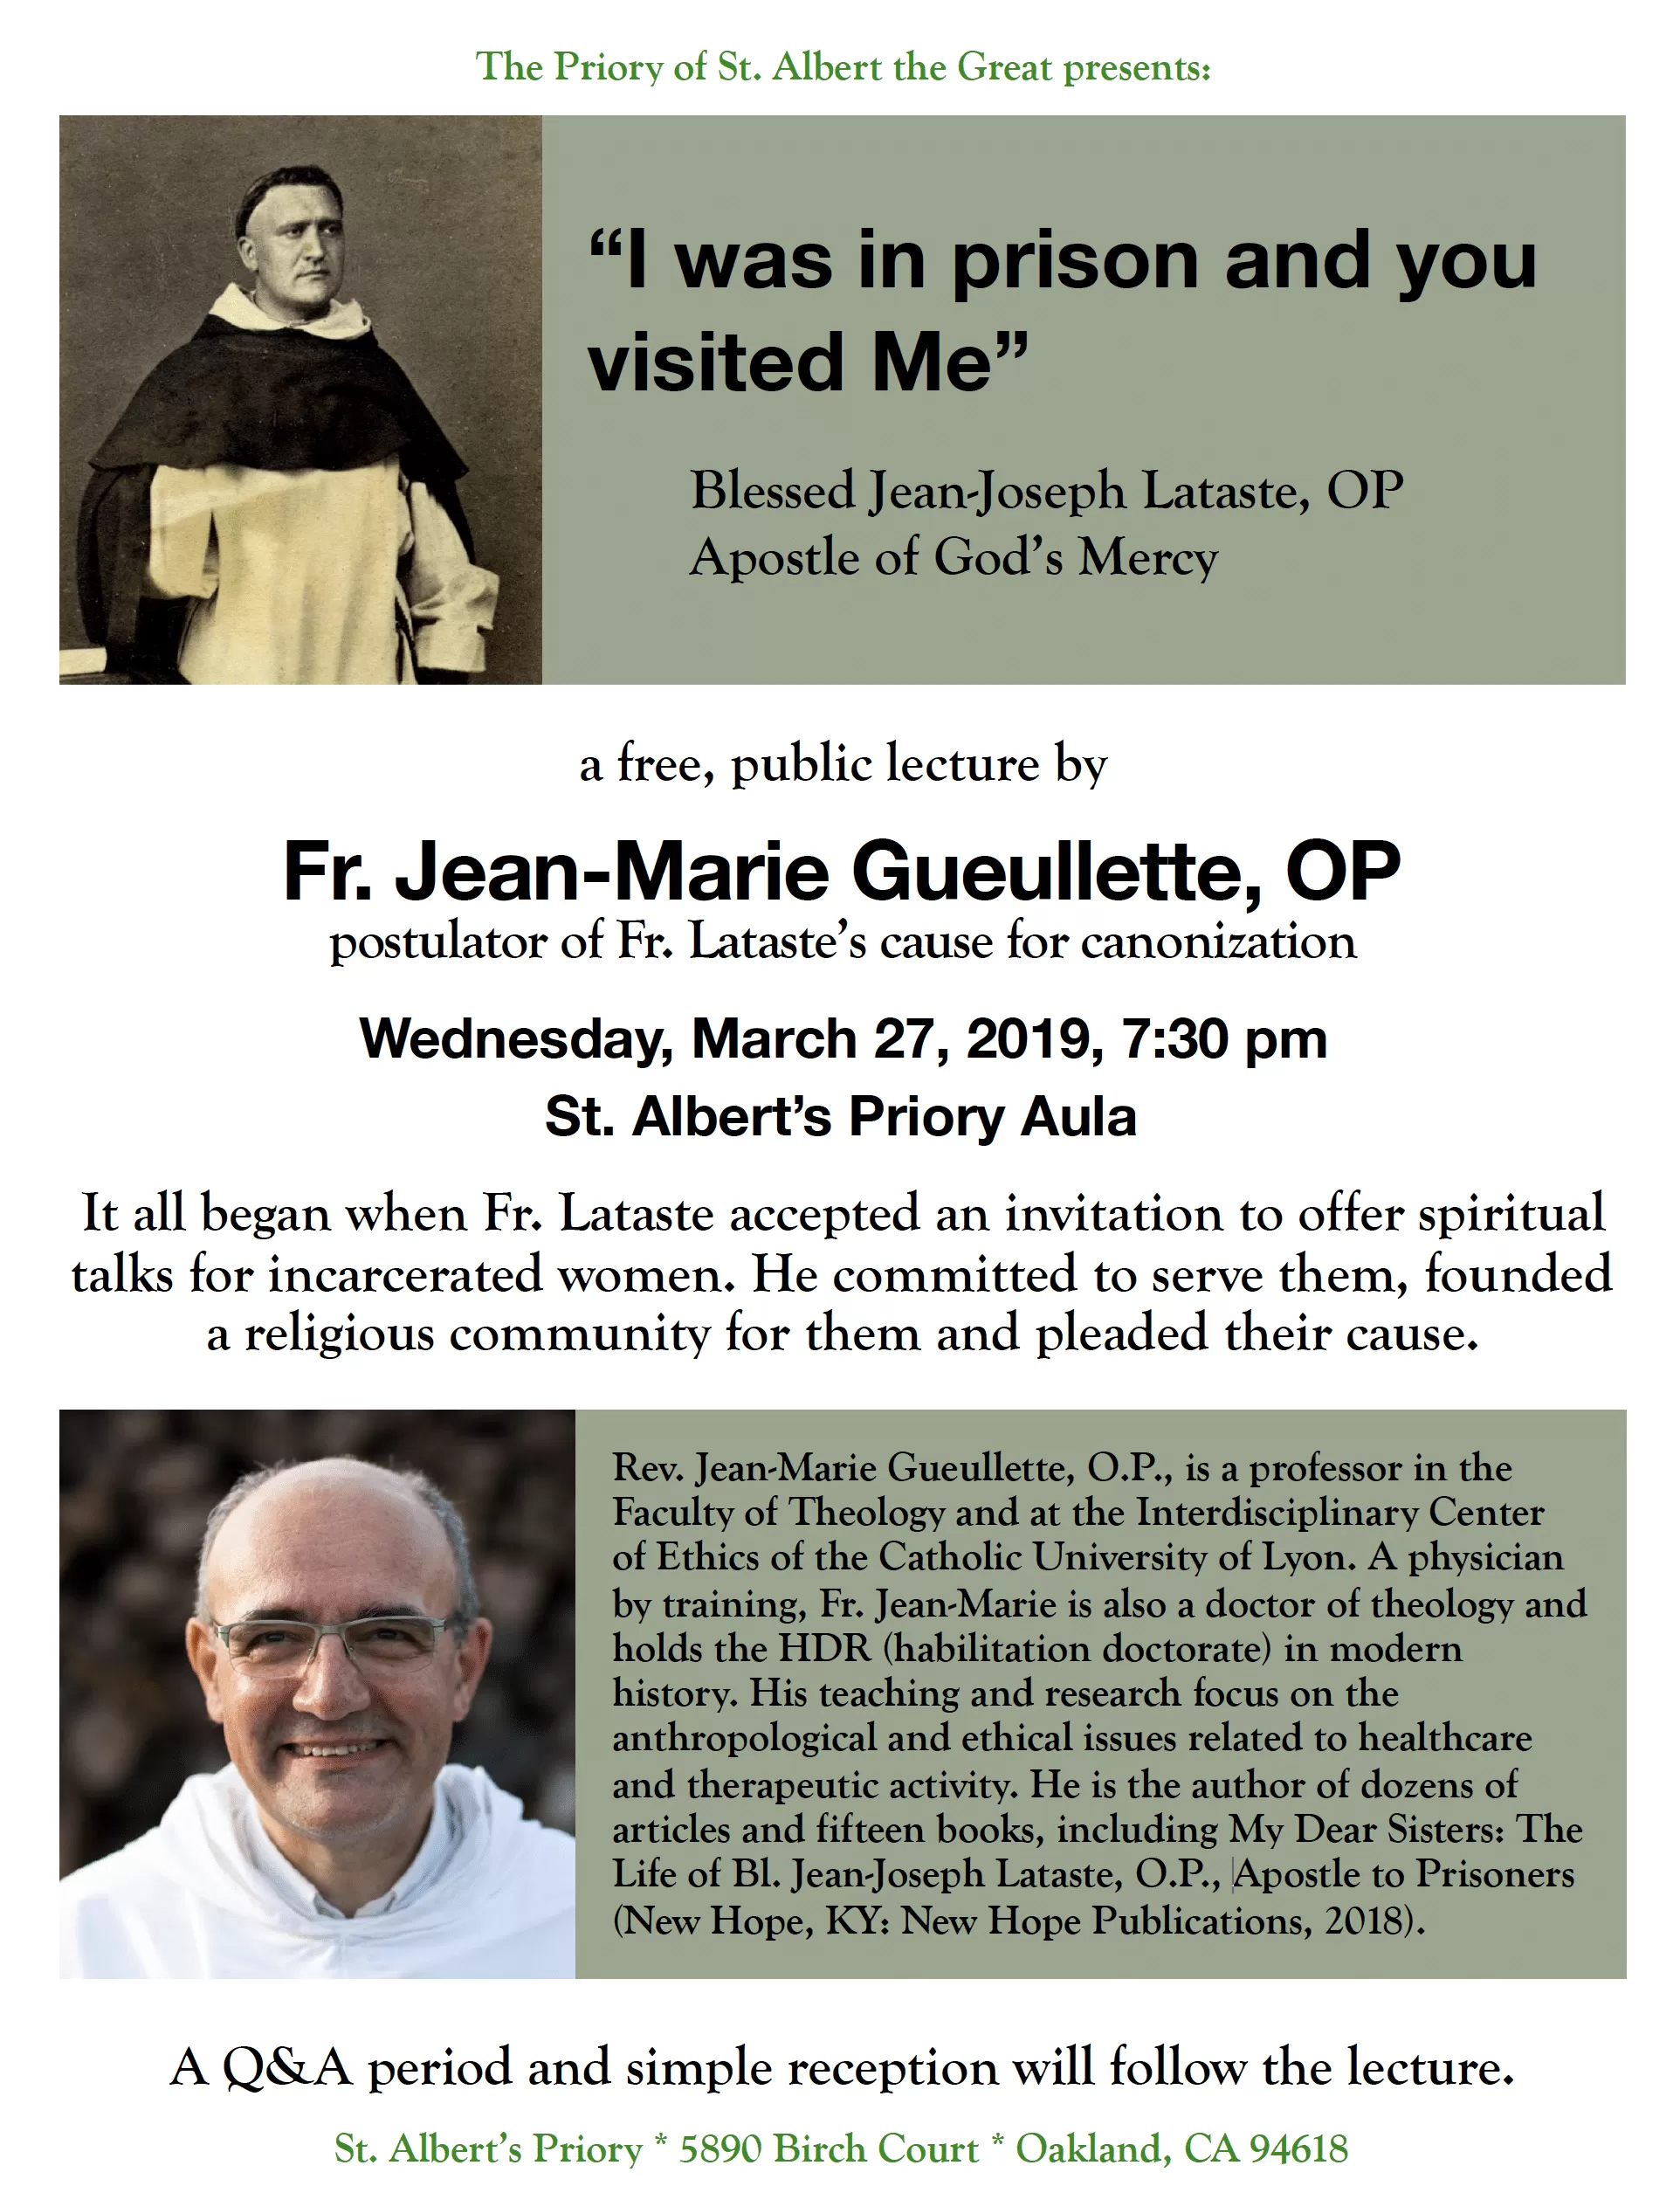 St. Albert's Priory Lecture on Blessed Jean-Joseph Lataste, O.P. | March 27, 2019